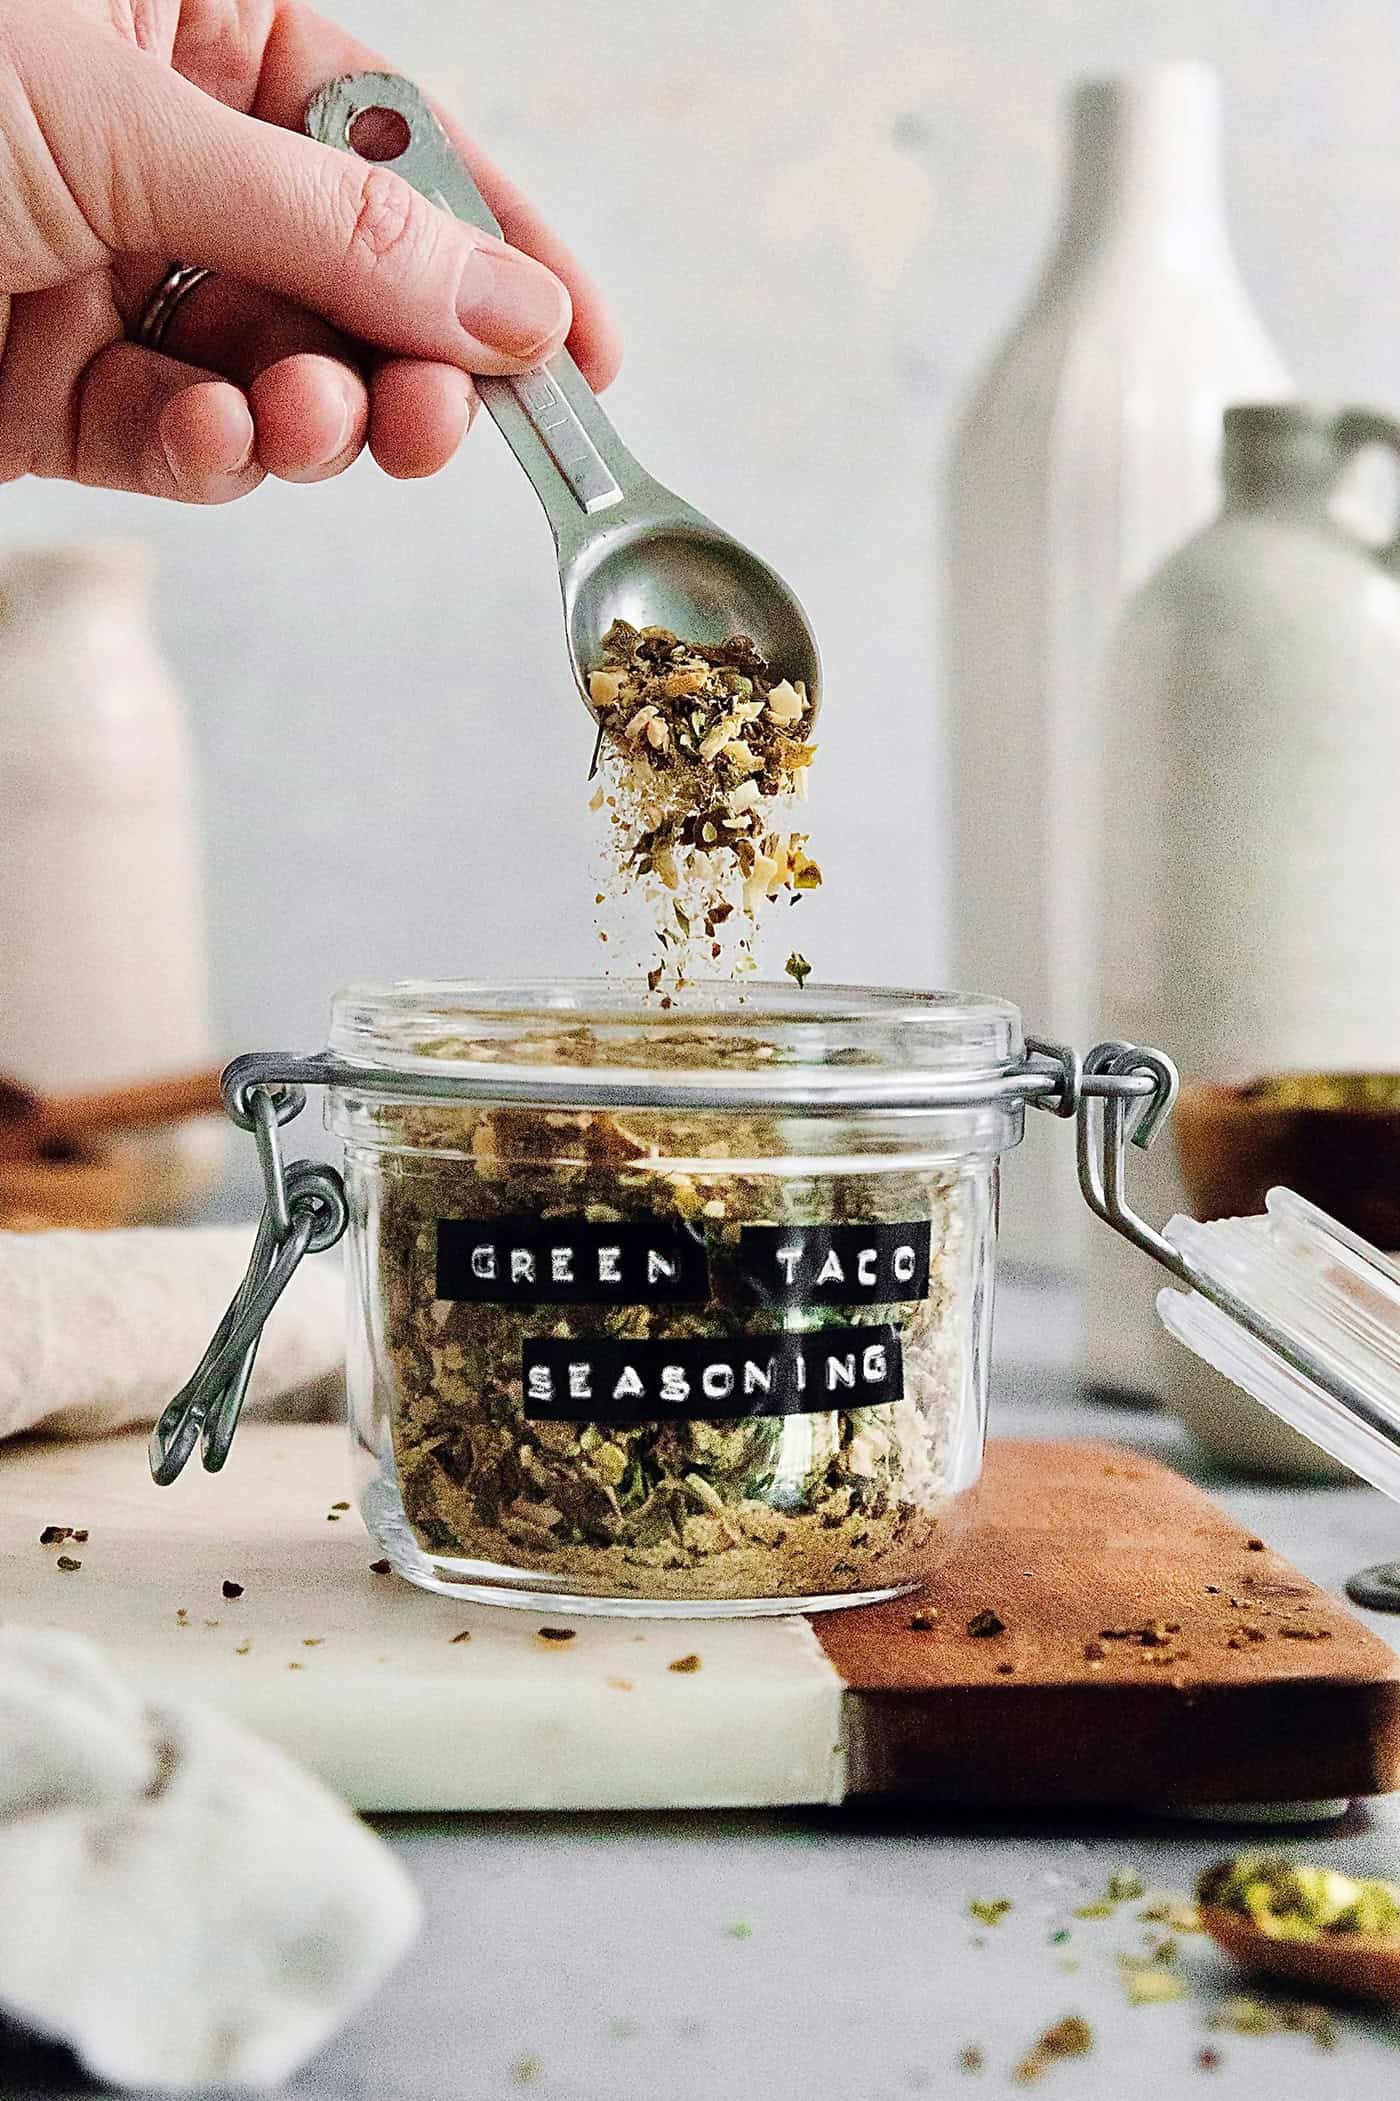 a hand holding a spoon that is dropping green taco seasoning into a jar